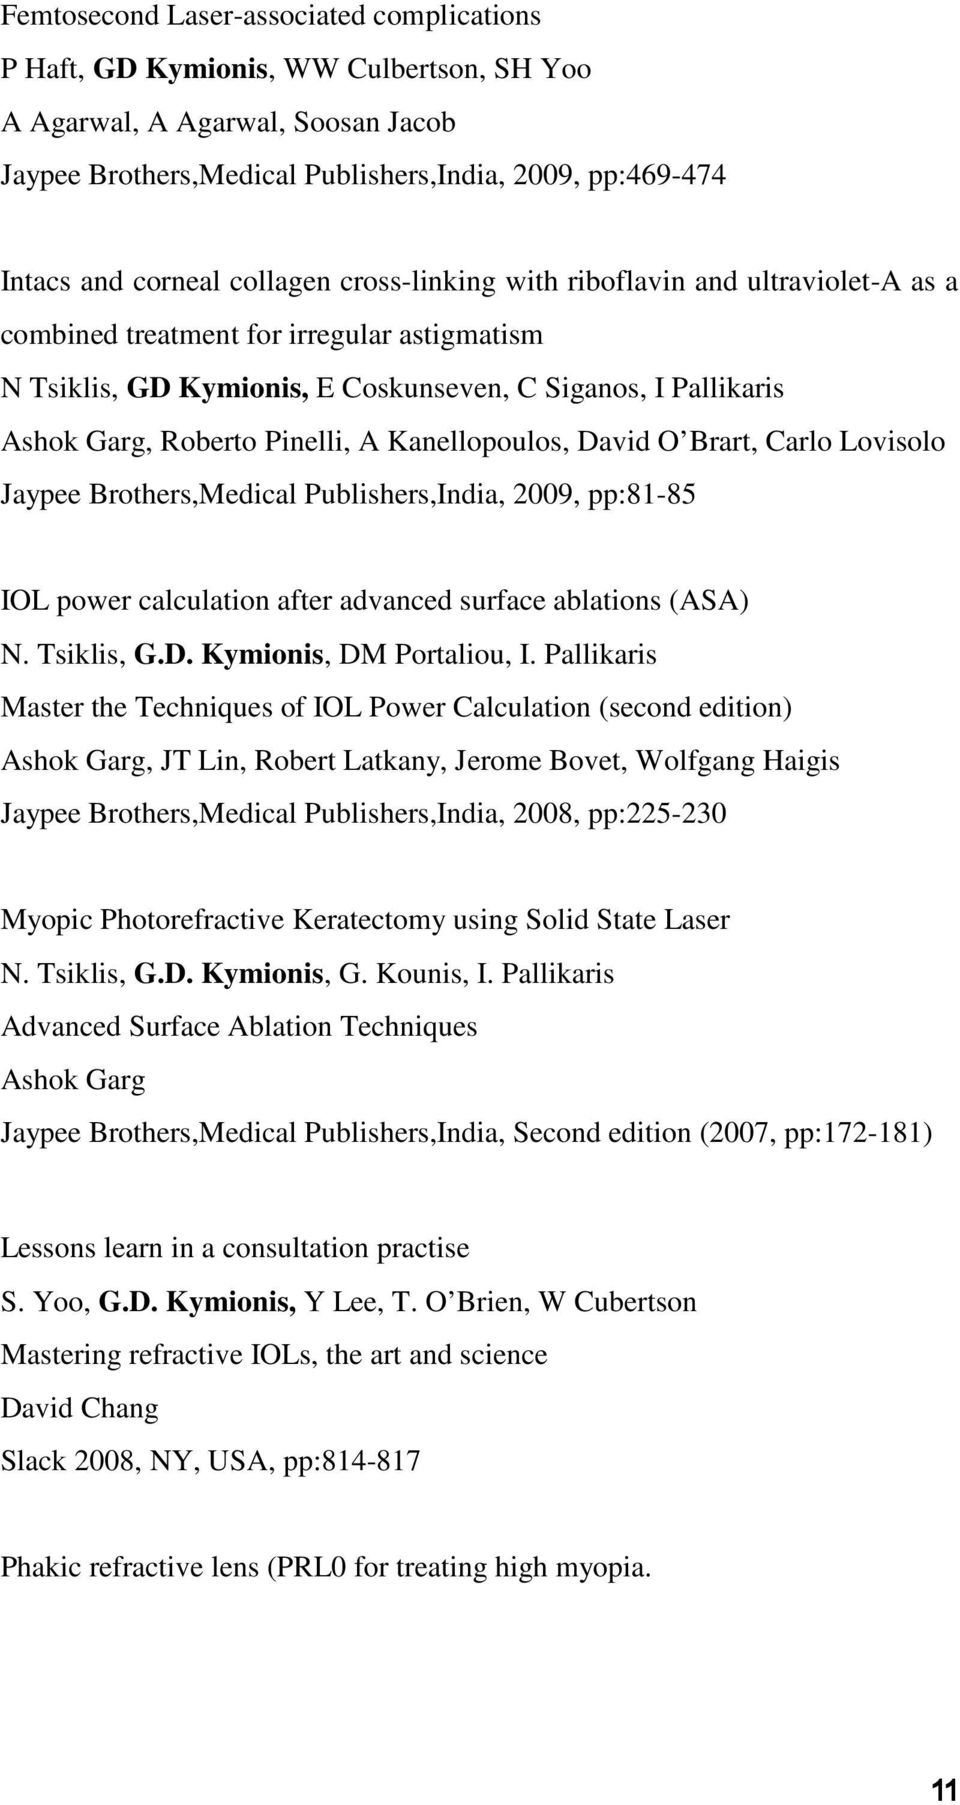 A Kanellopoulos, David O Brart, Carlo Lovisolo Jaypee Brothers,Medical Publishers,India, 2009, pp:81-85 IOL power calculation after advanced surface ablations (ASA) N. Tsiklis, G.D. Kymionis, DM Portaliou, I.